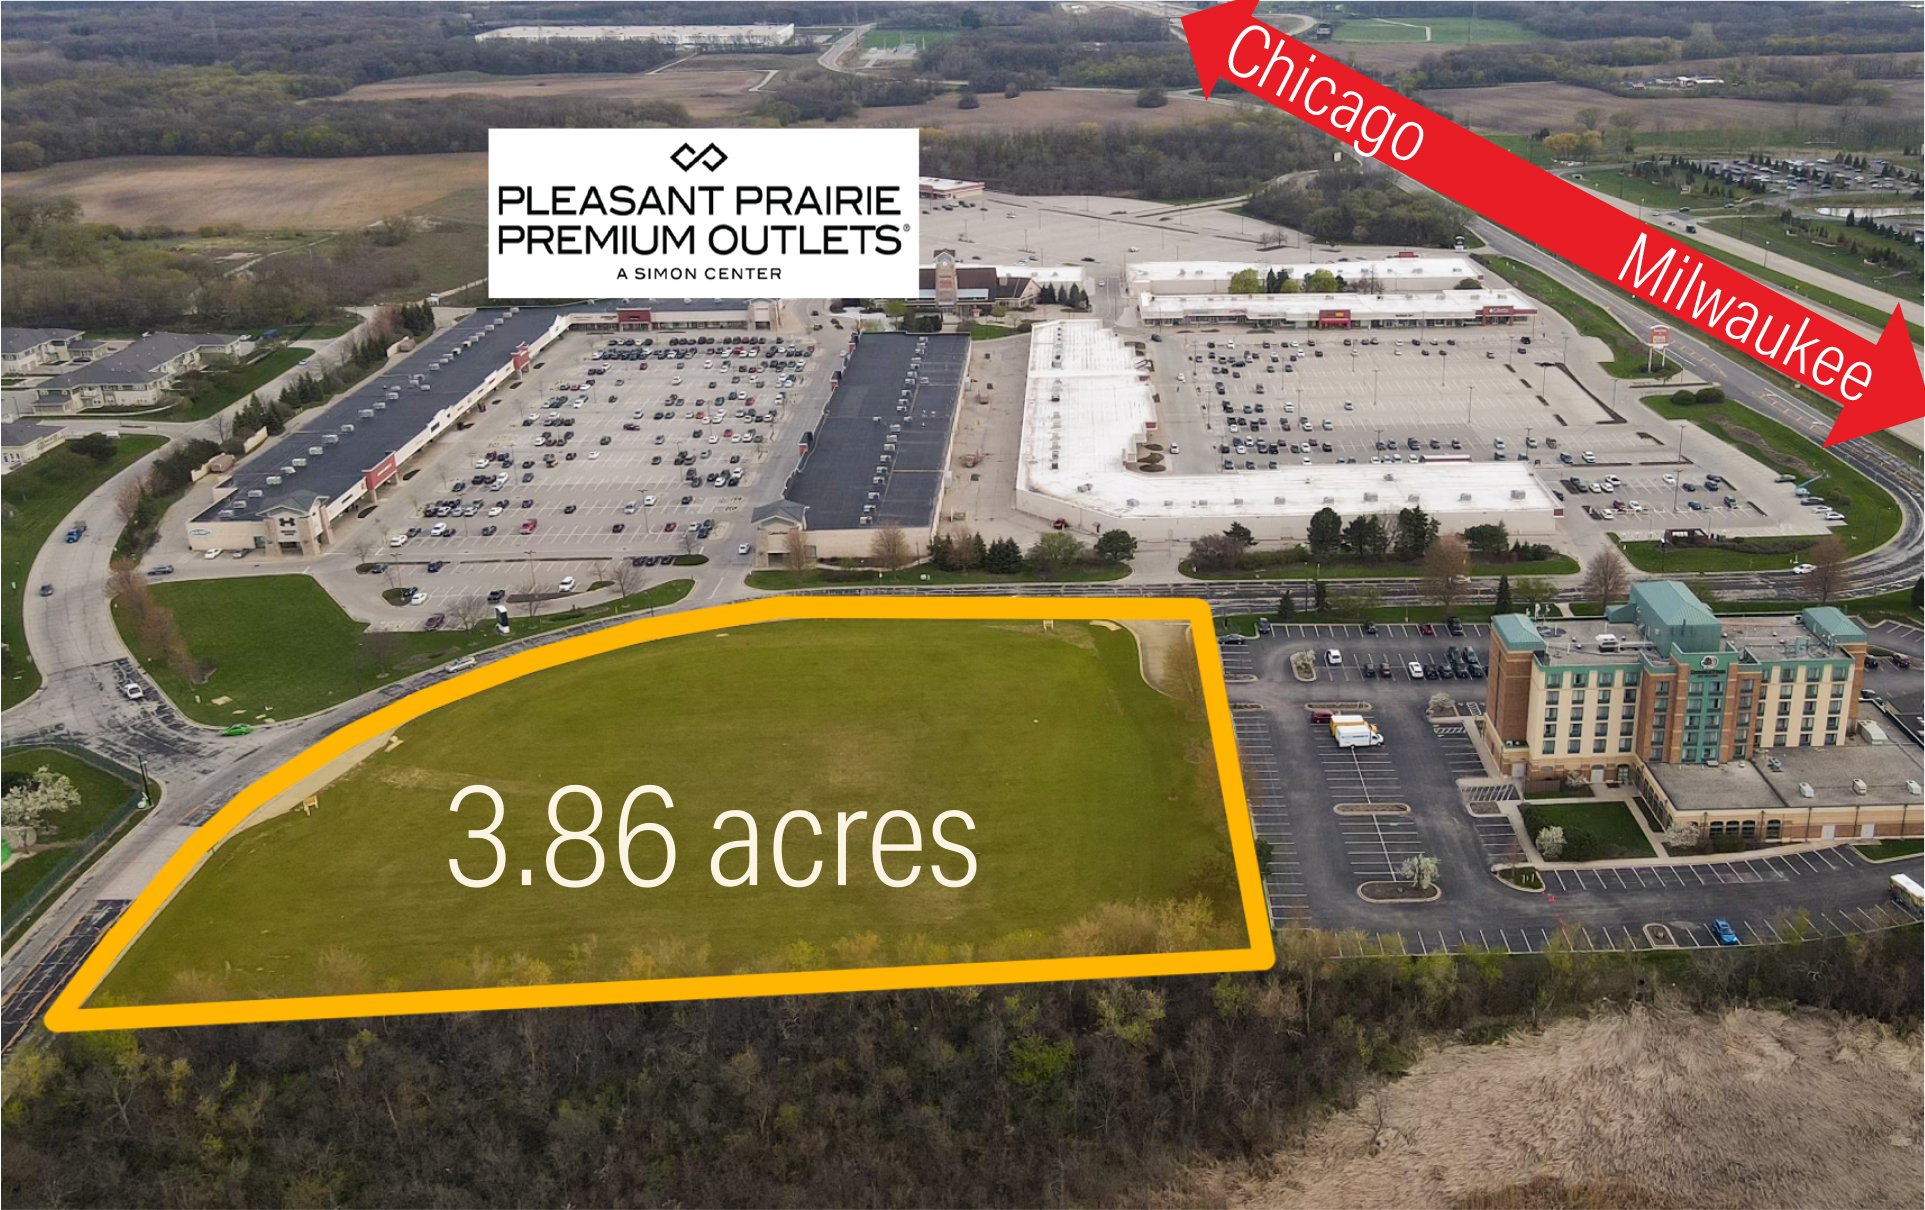 FOR SALE in Pleasant Prairie, WI: Land Adjacent to Premium Outlet Mall —  City Commercial Real Estate